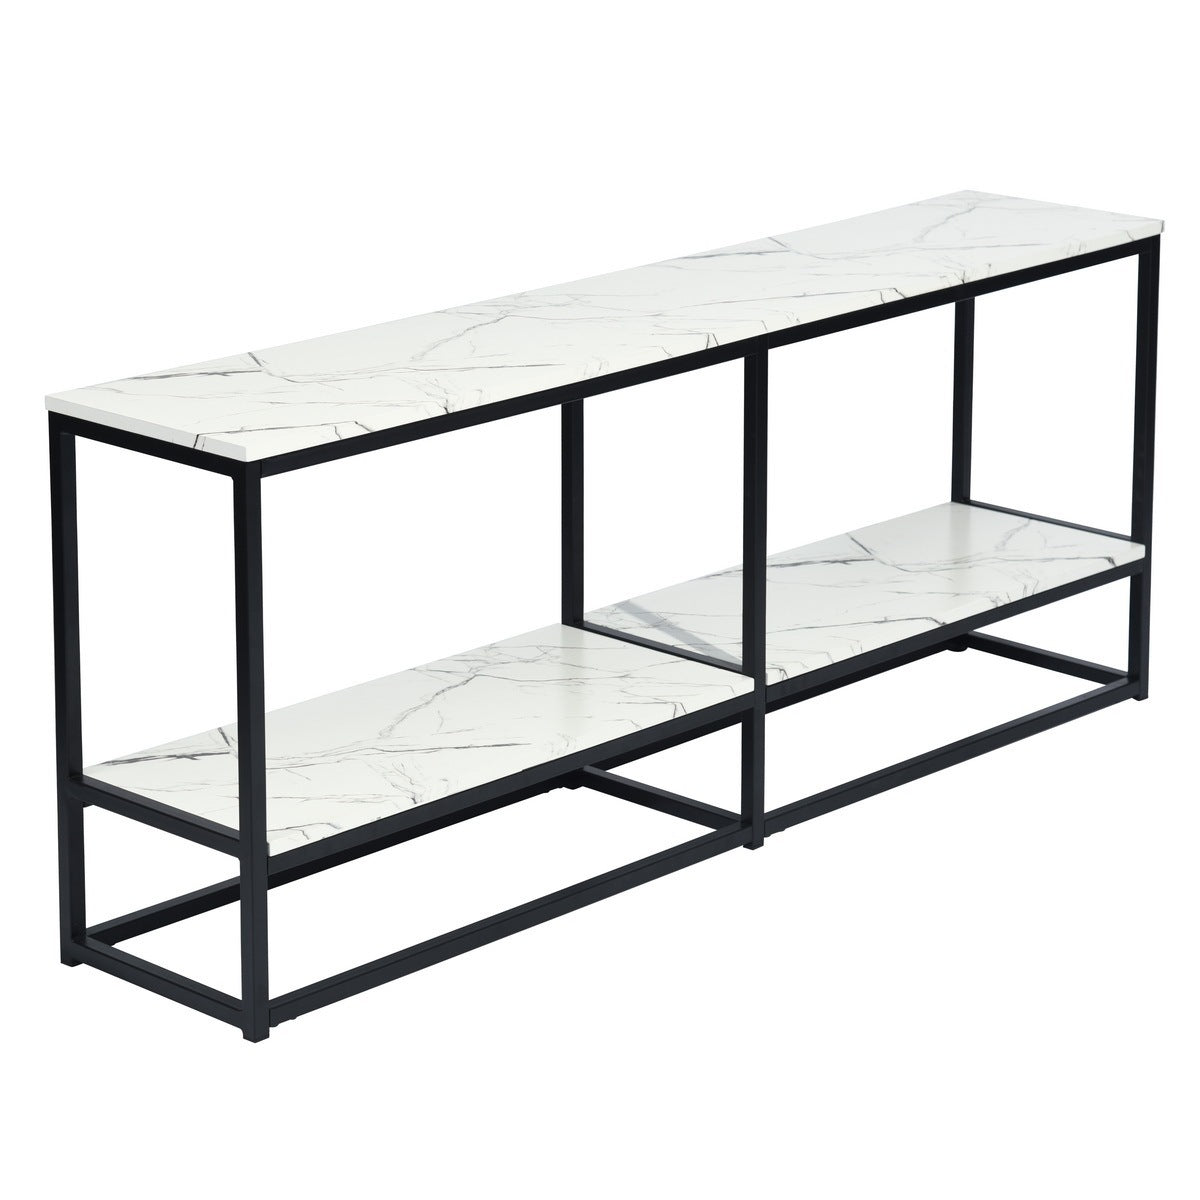 1st Choice 59.8" TV Stand for TV up to 65 Inches With Storage Tier